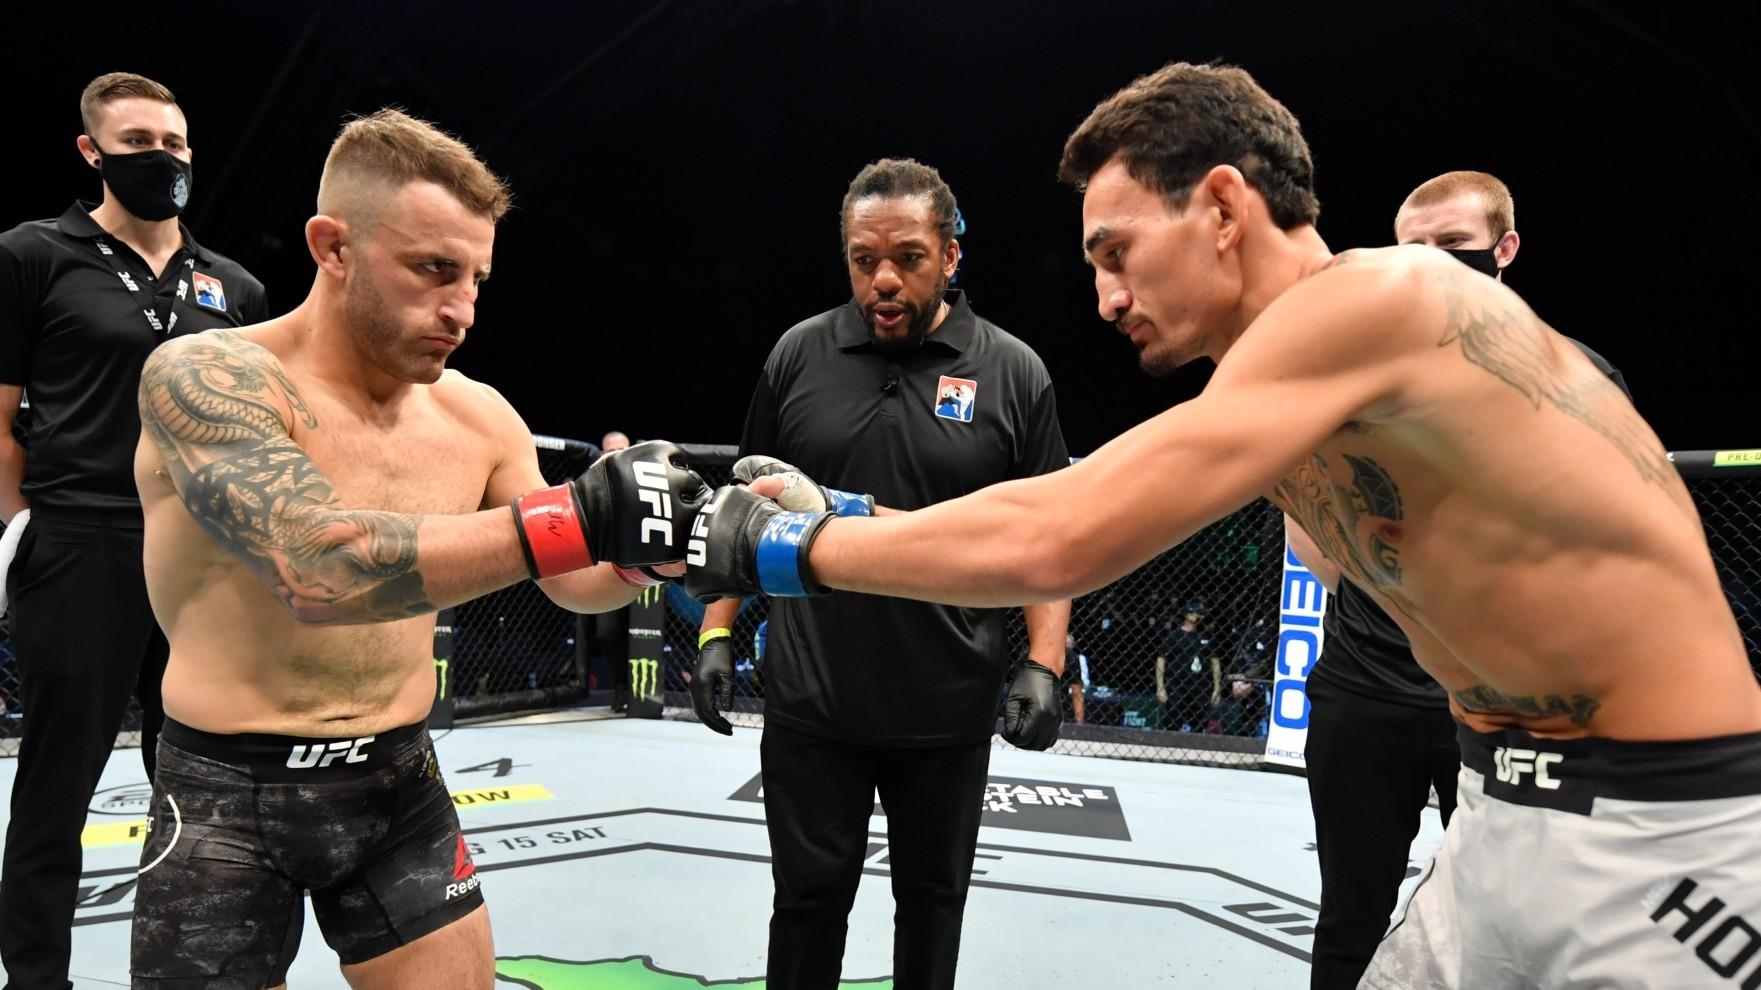 Alexander Volkanovski and Max Holloway will fight for the third time at UFC 276